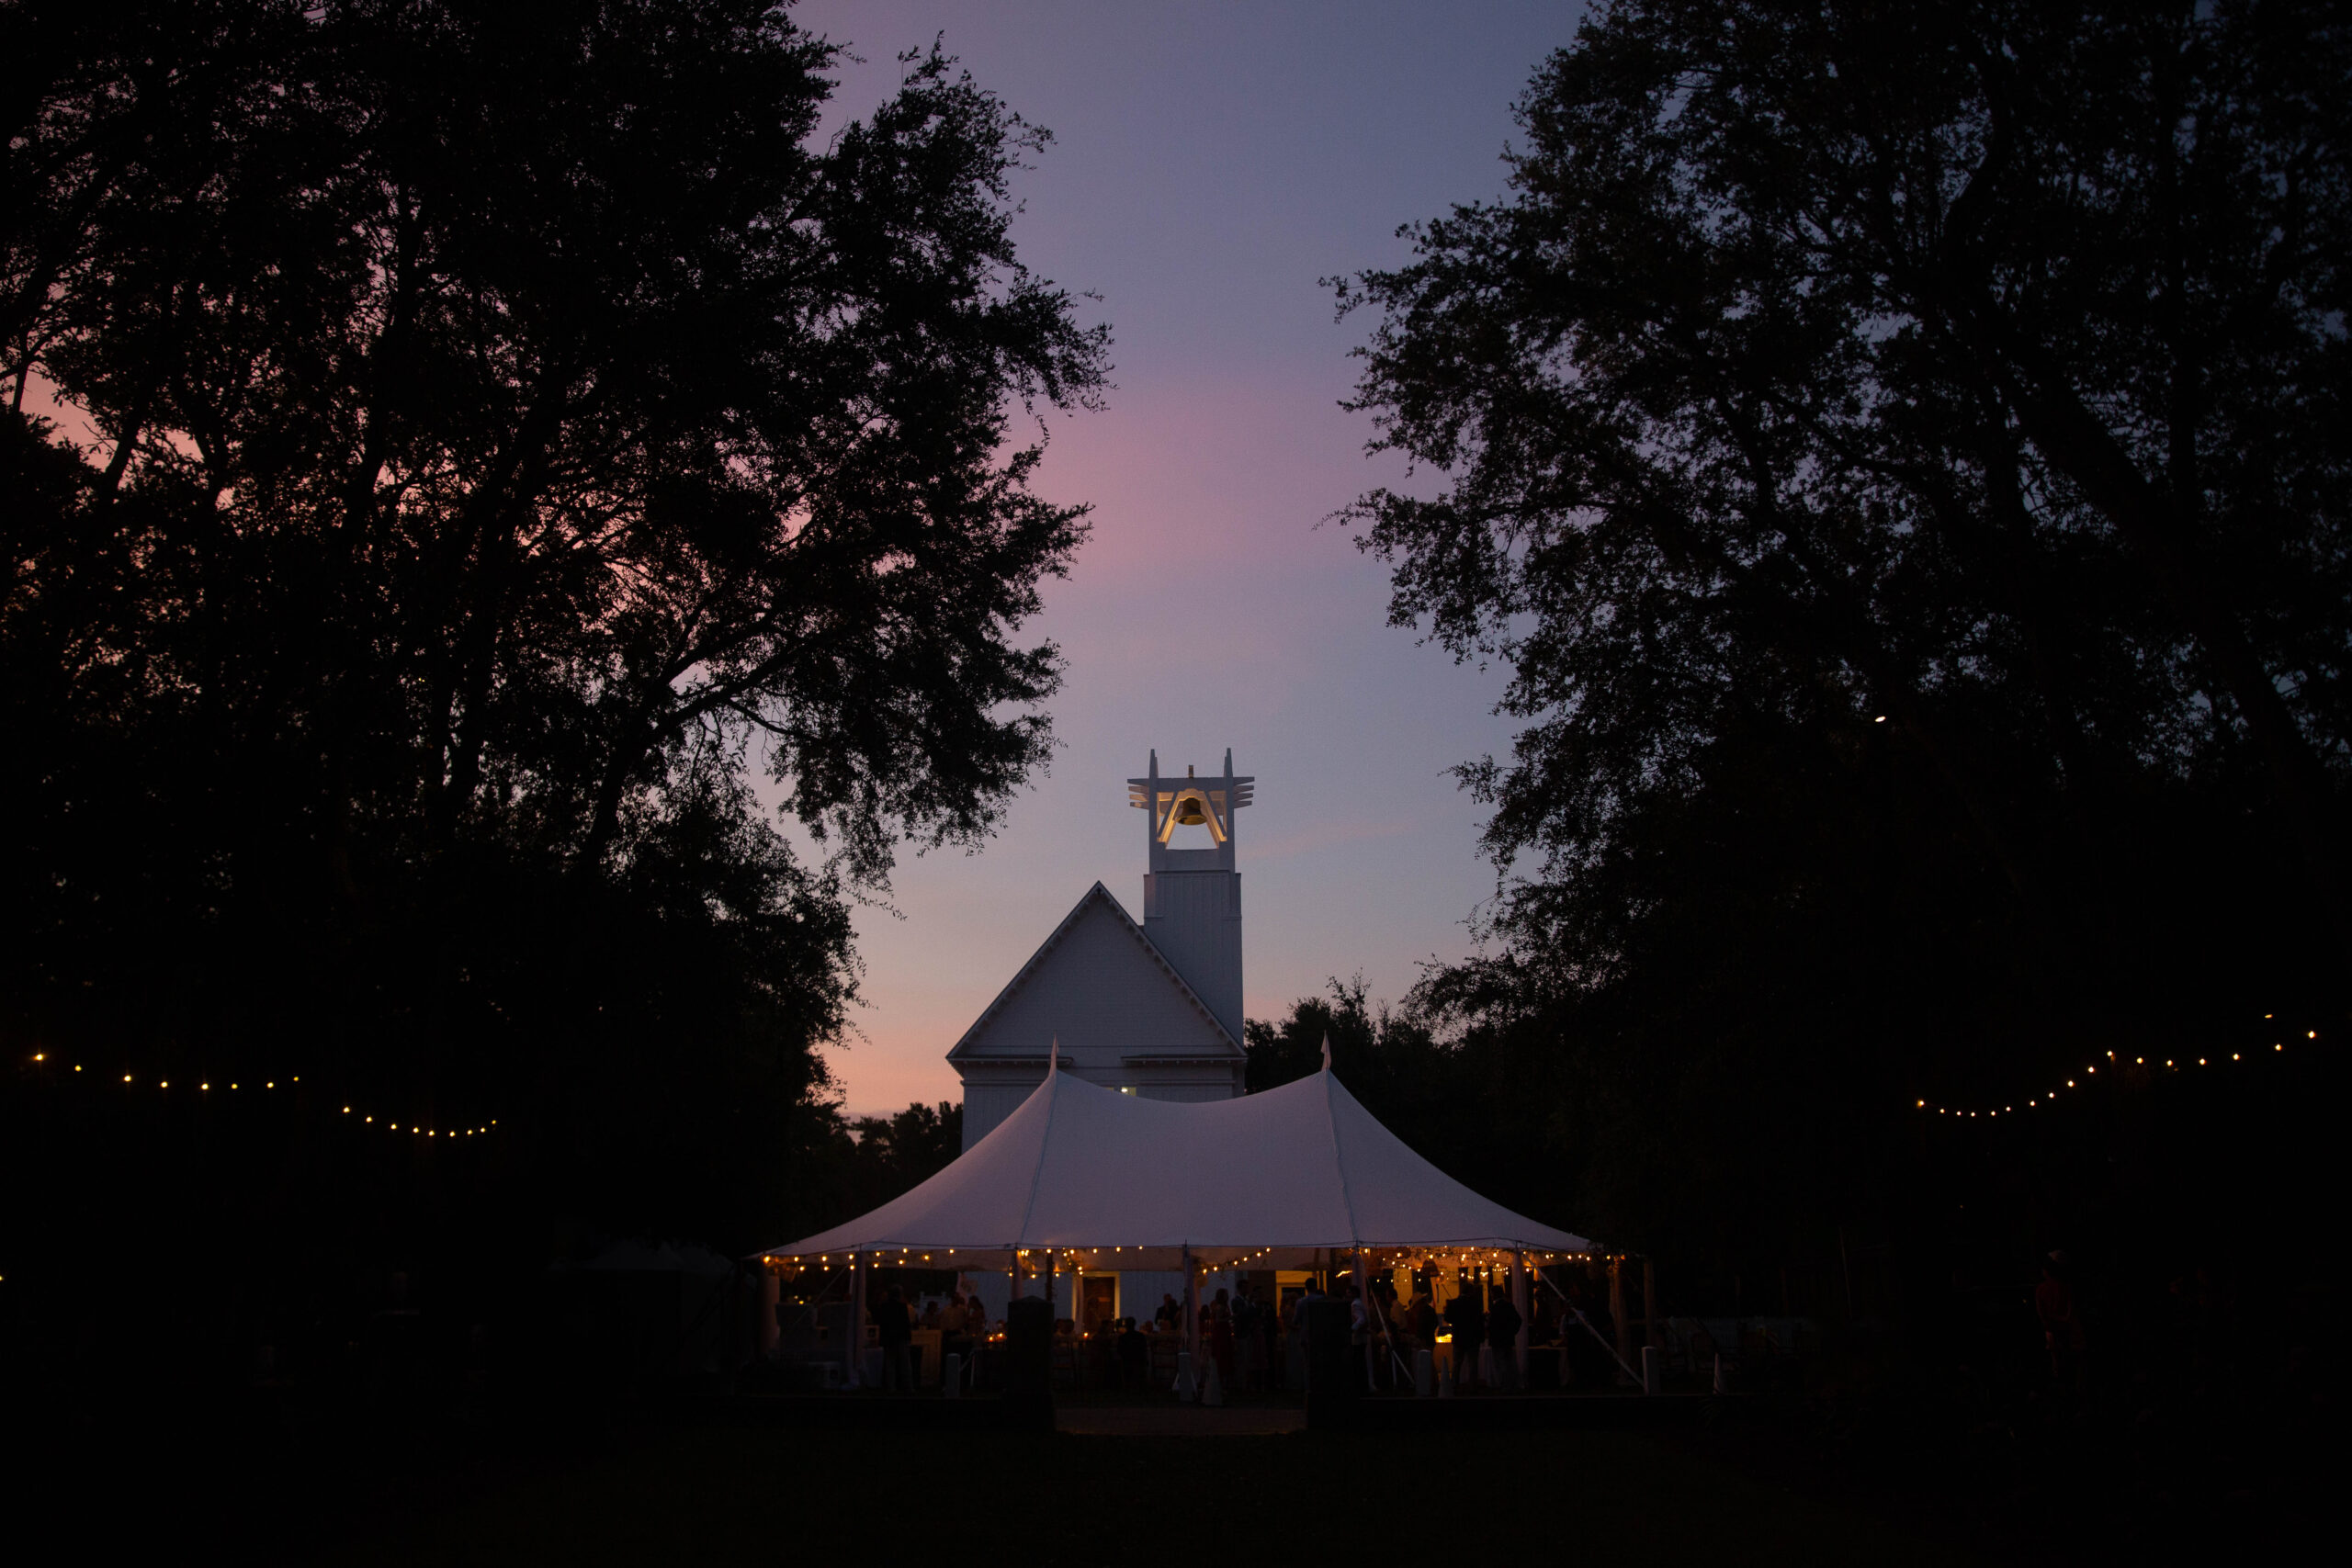 A tented wedding reception glowing as dusk ascends in the sky turns shades of pink and purple with a Seaside Chapel in the background during a destination Florida wedding